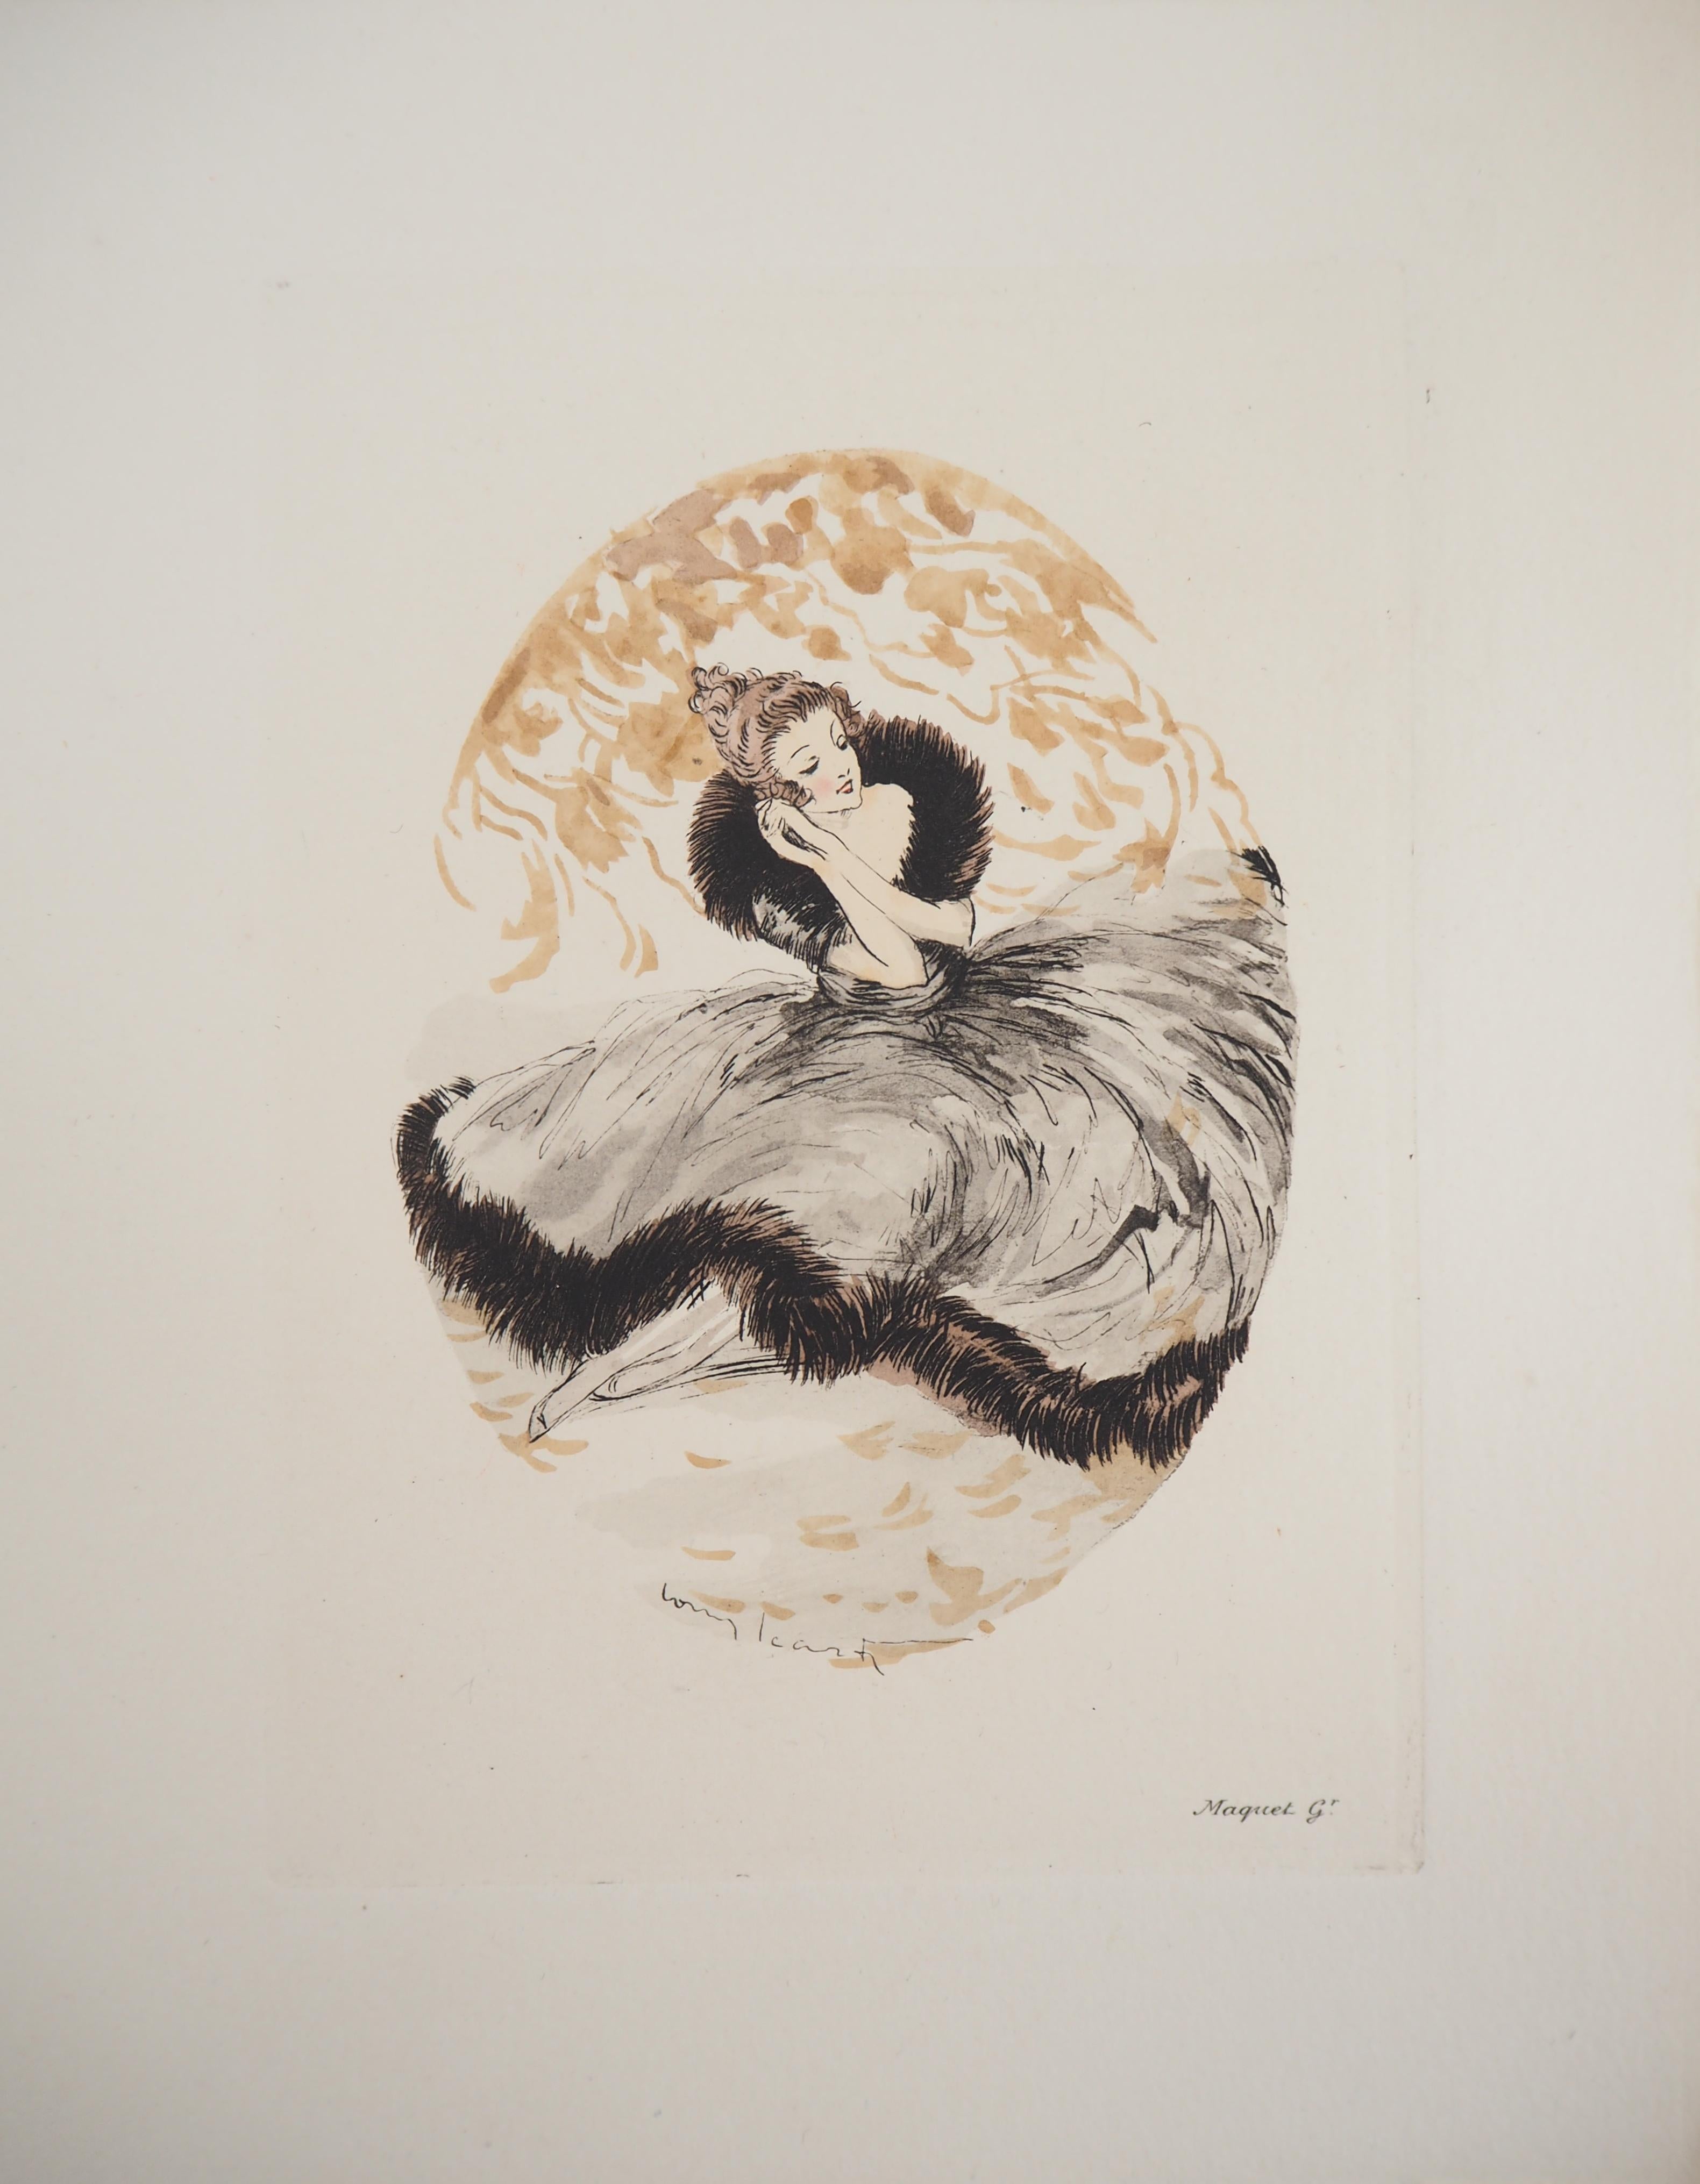 Louis Icart
Dreaming Girl

Original etching and stencil
Printed signature in the plate
On vellum 19 x 29 cm (c. 8 x 12 in)

Excellent condition